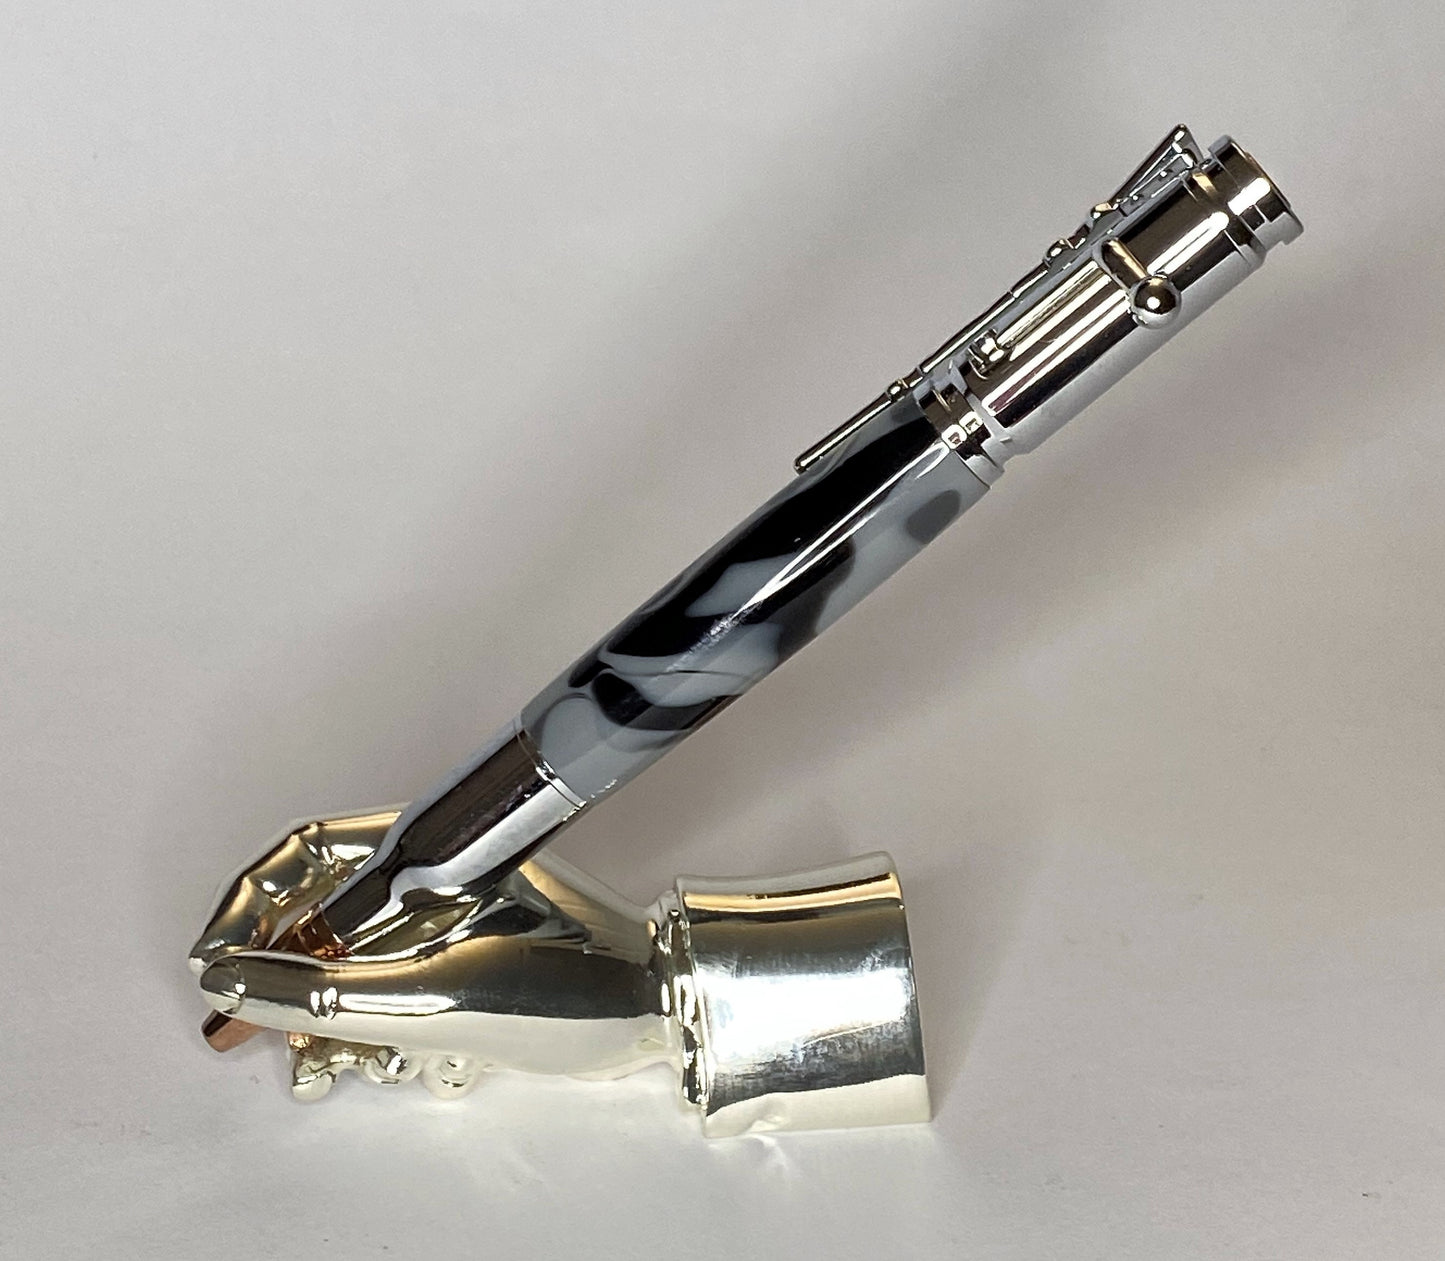 A right hand shaped metal base holding a handturned Grey cammo acrylic Bolt action pen as you would hold it to write with.